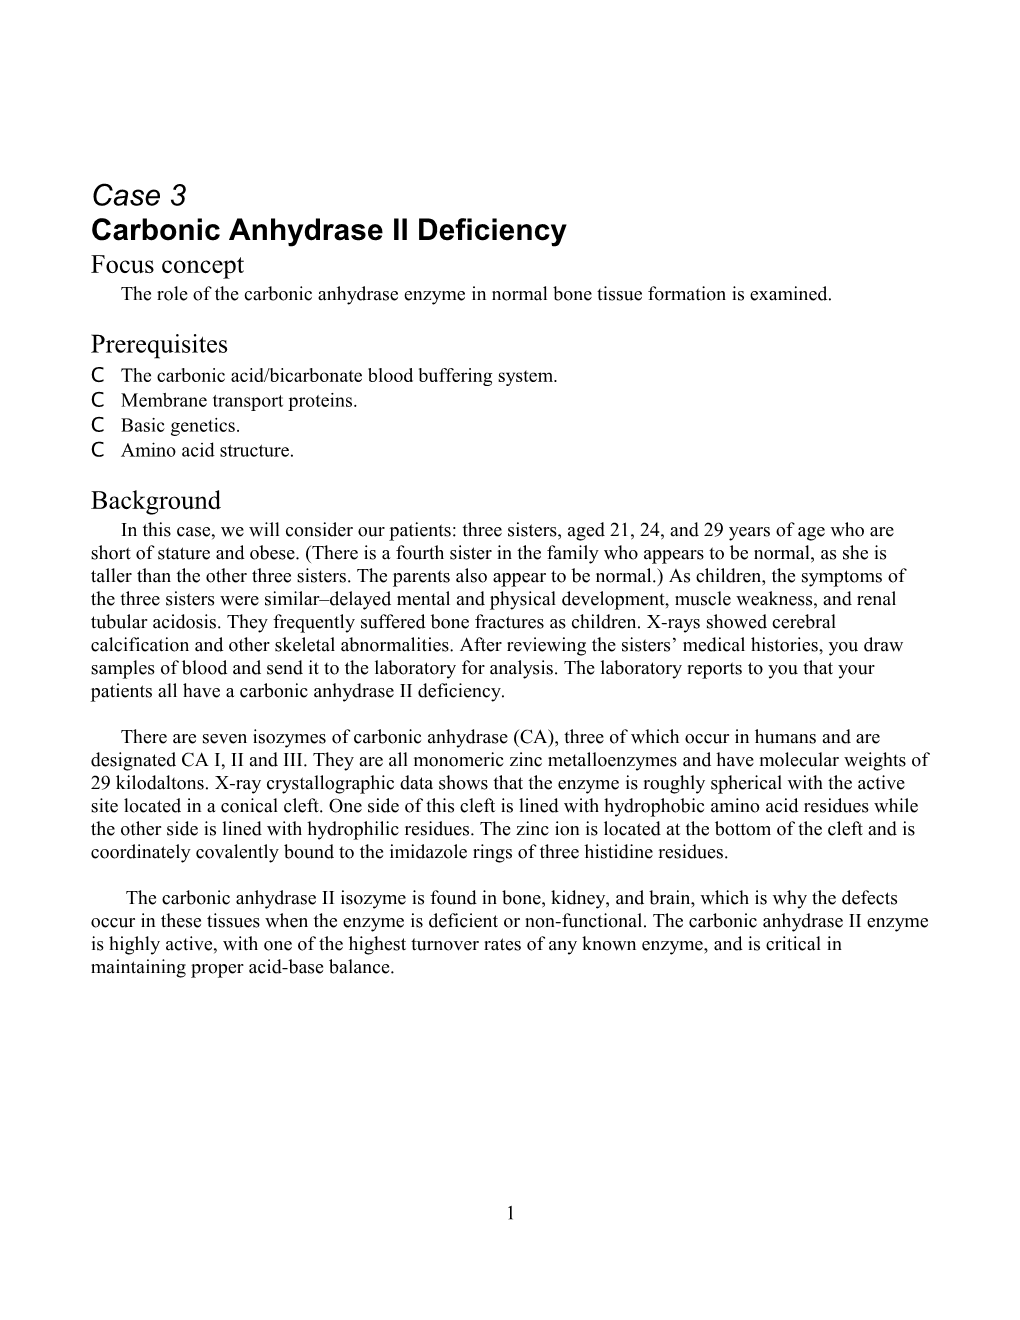 Carbonic Anhydrase II Deficiency